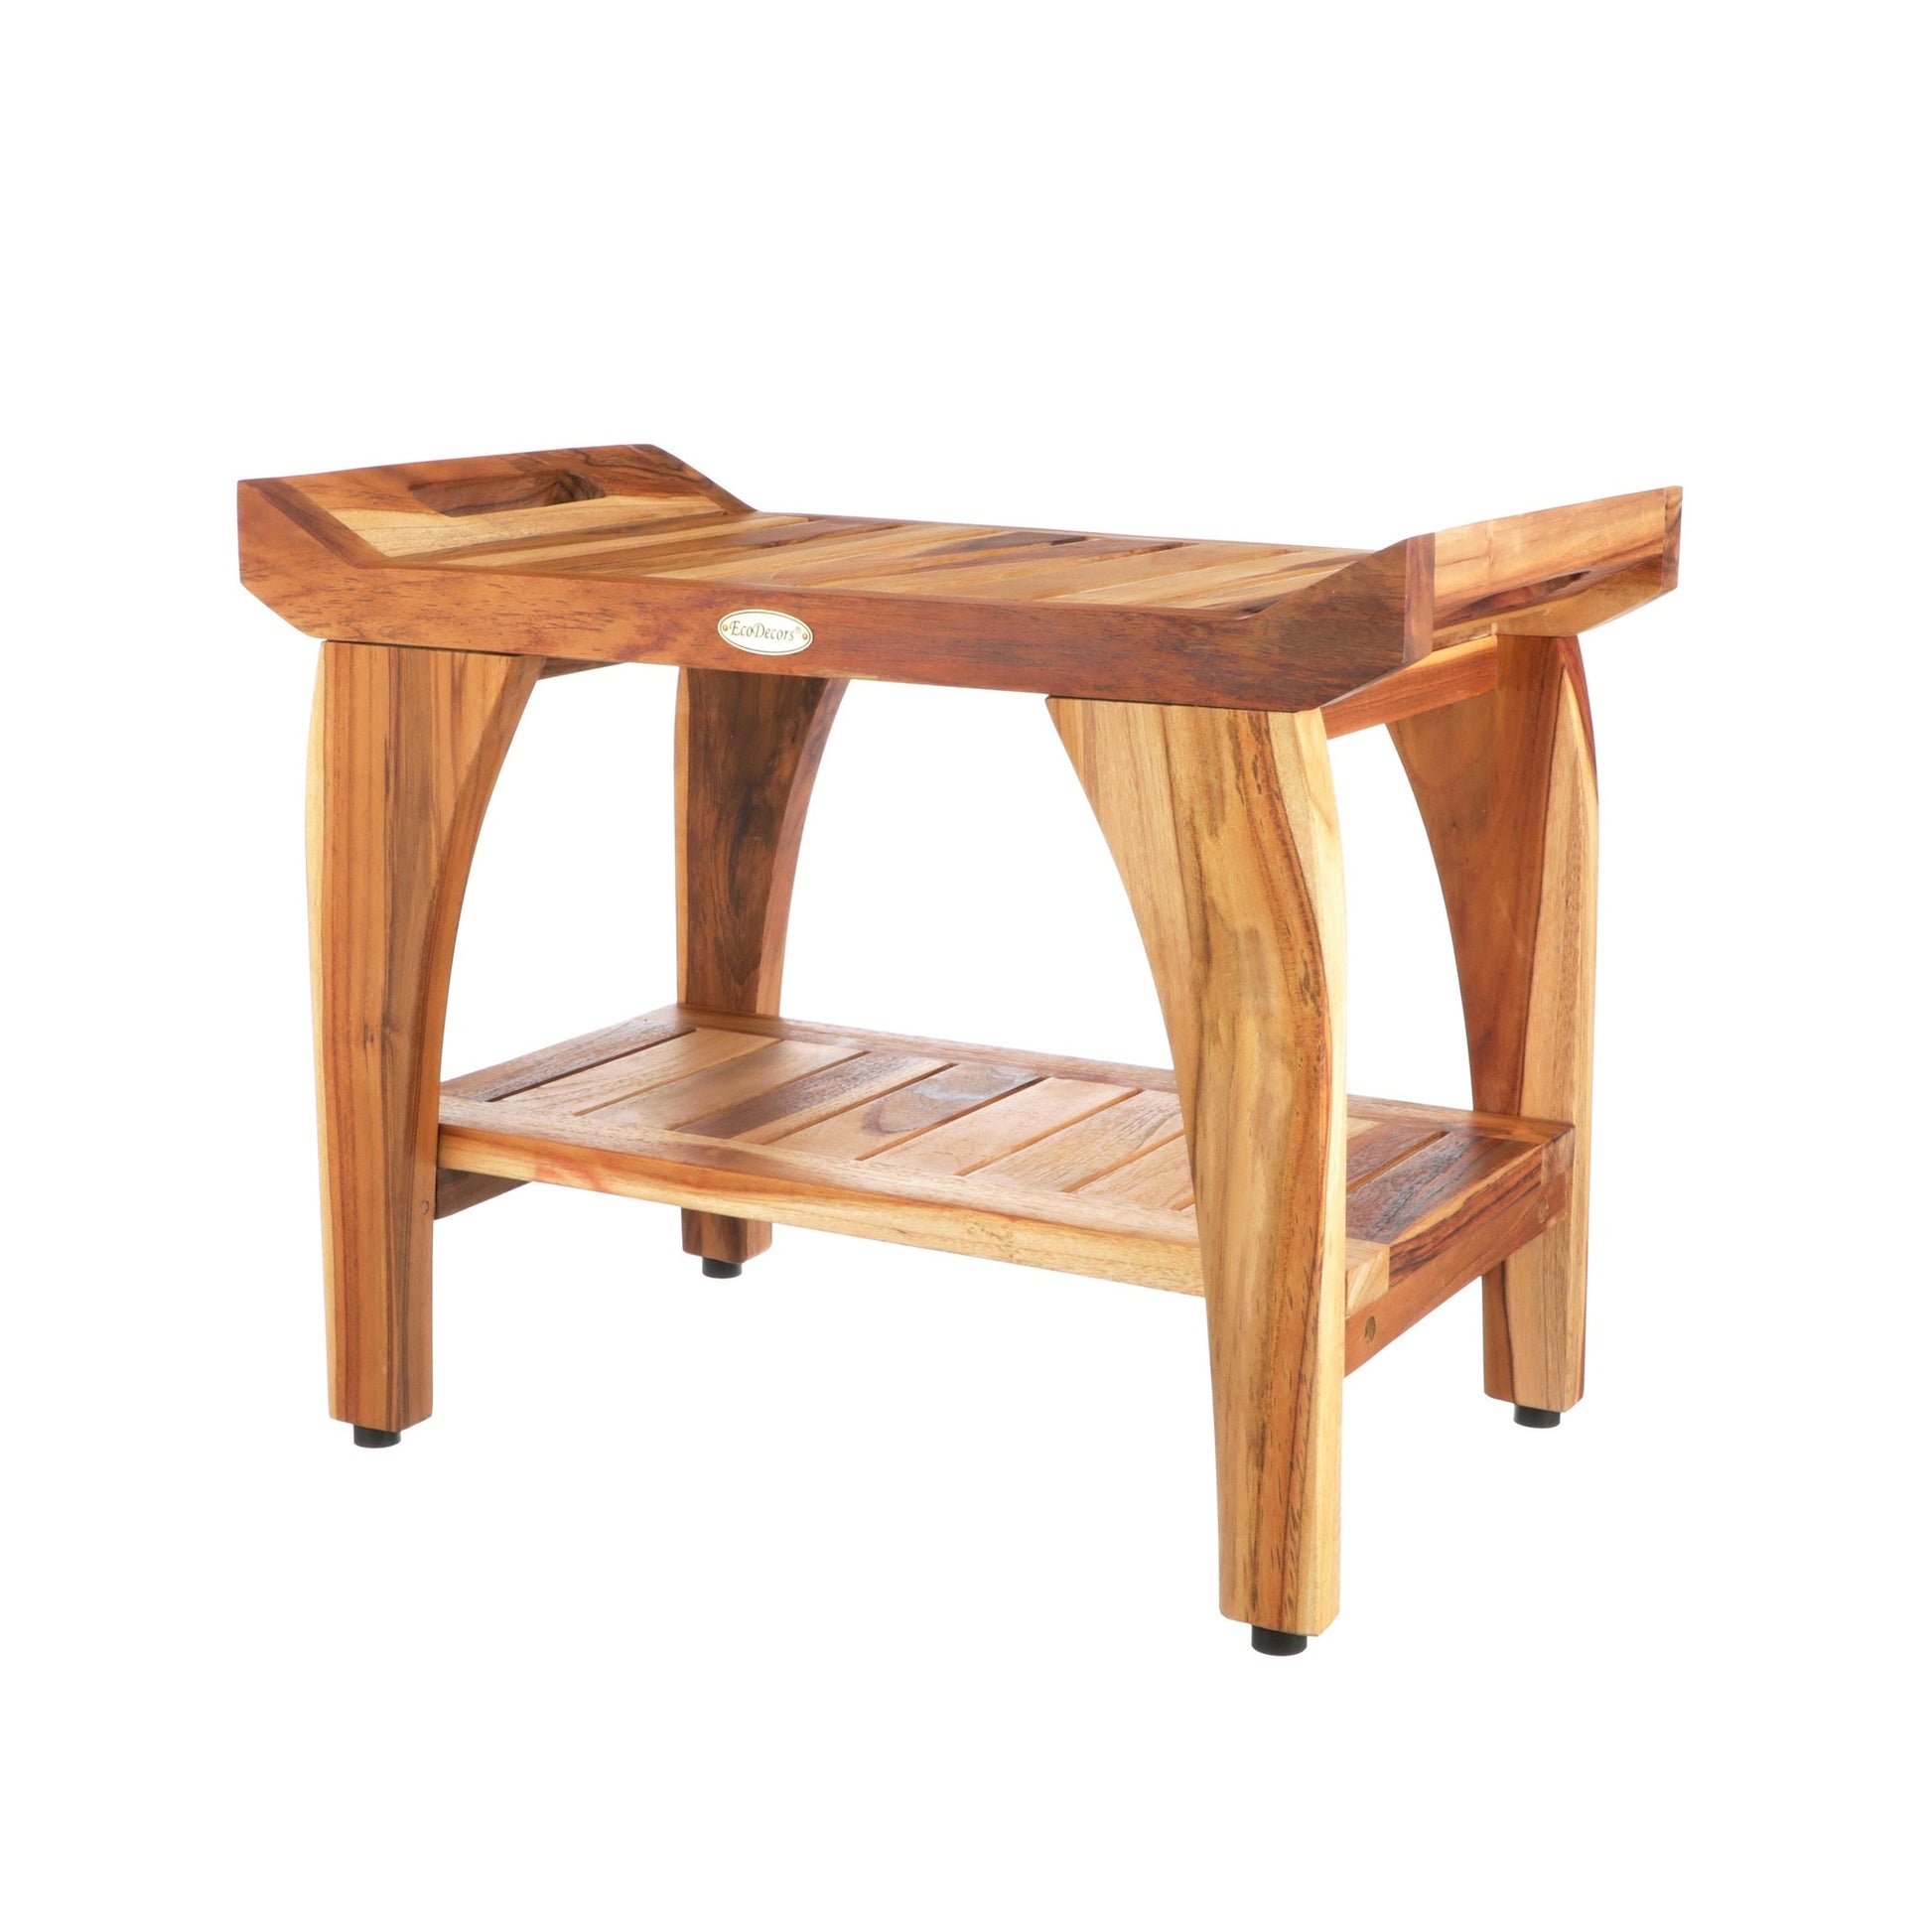 EcoDecors Tranquility 24" EarthyTeak Solid Teak Wood Shower Bench With Shelf and LiftAide Arms